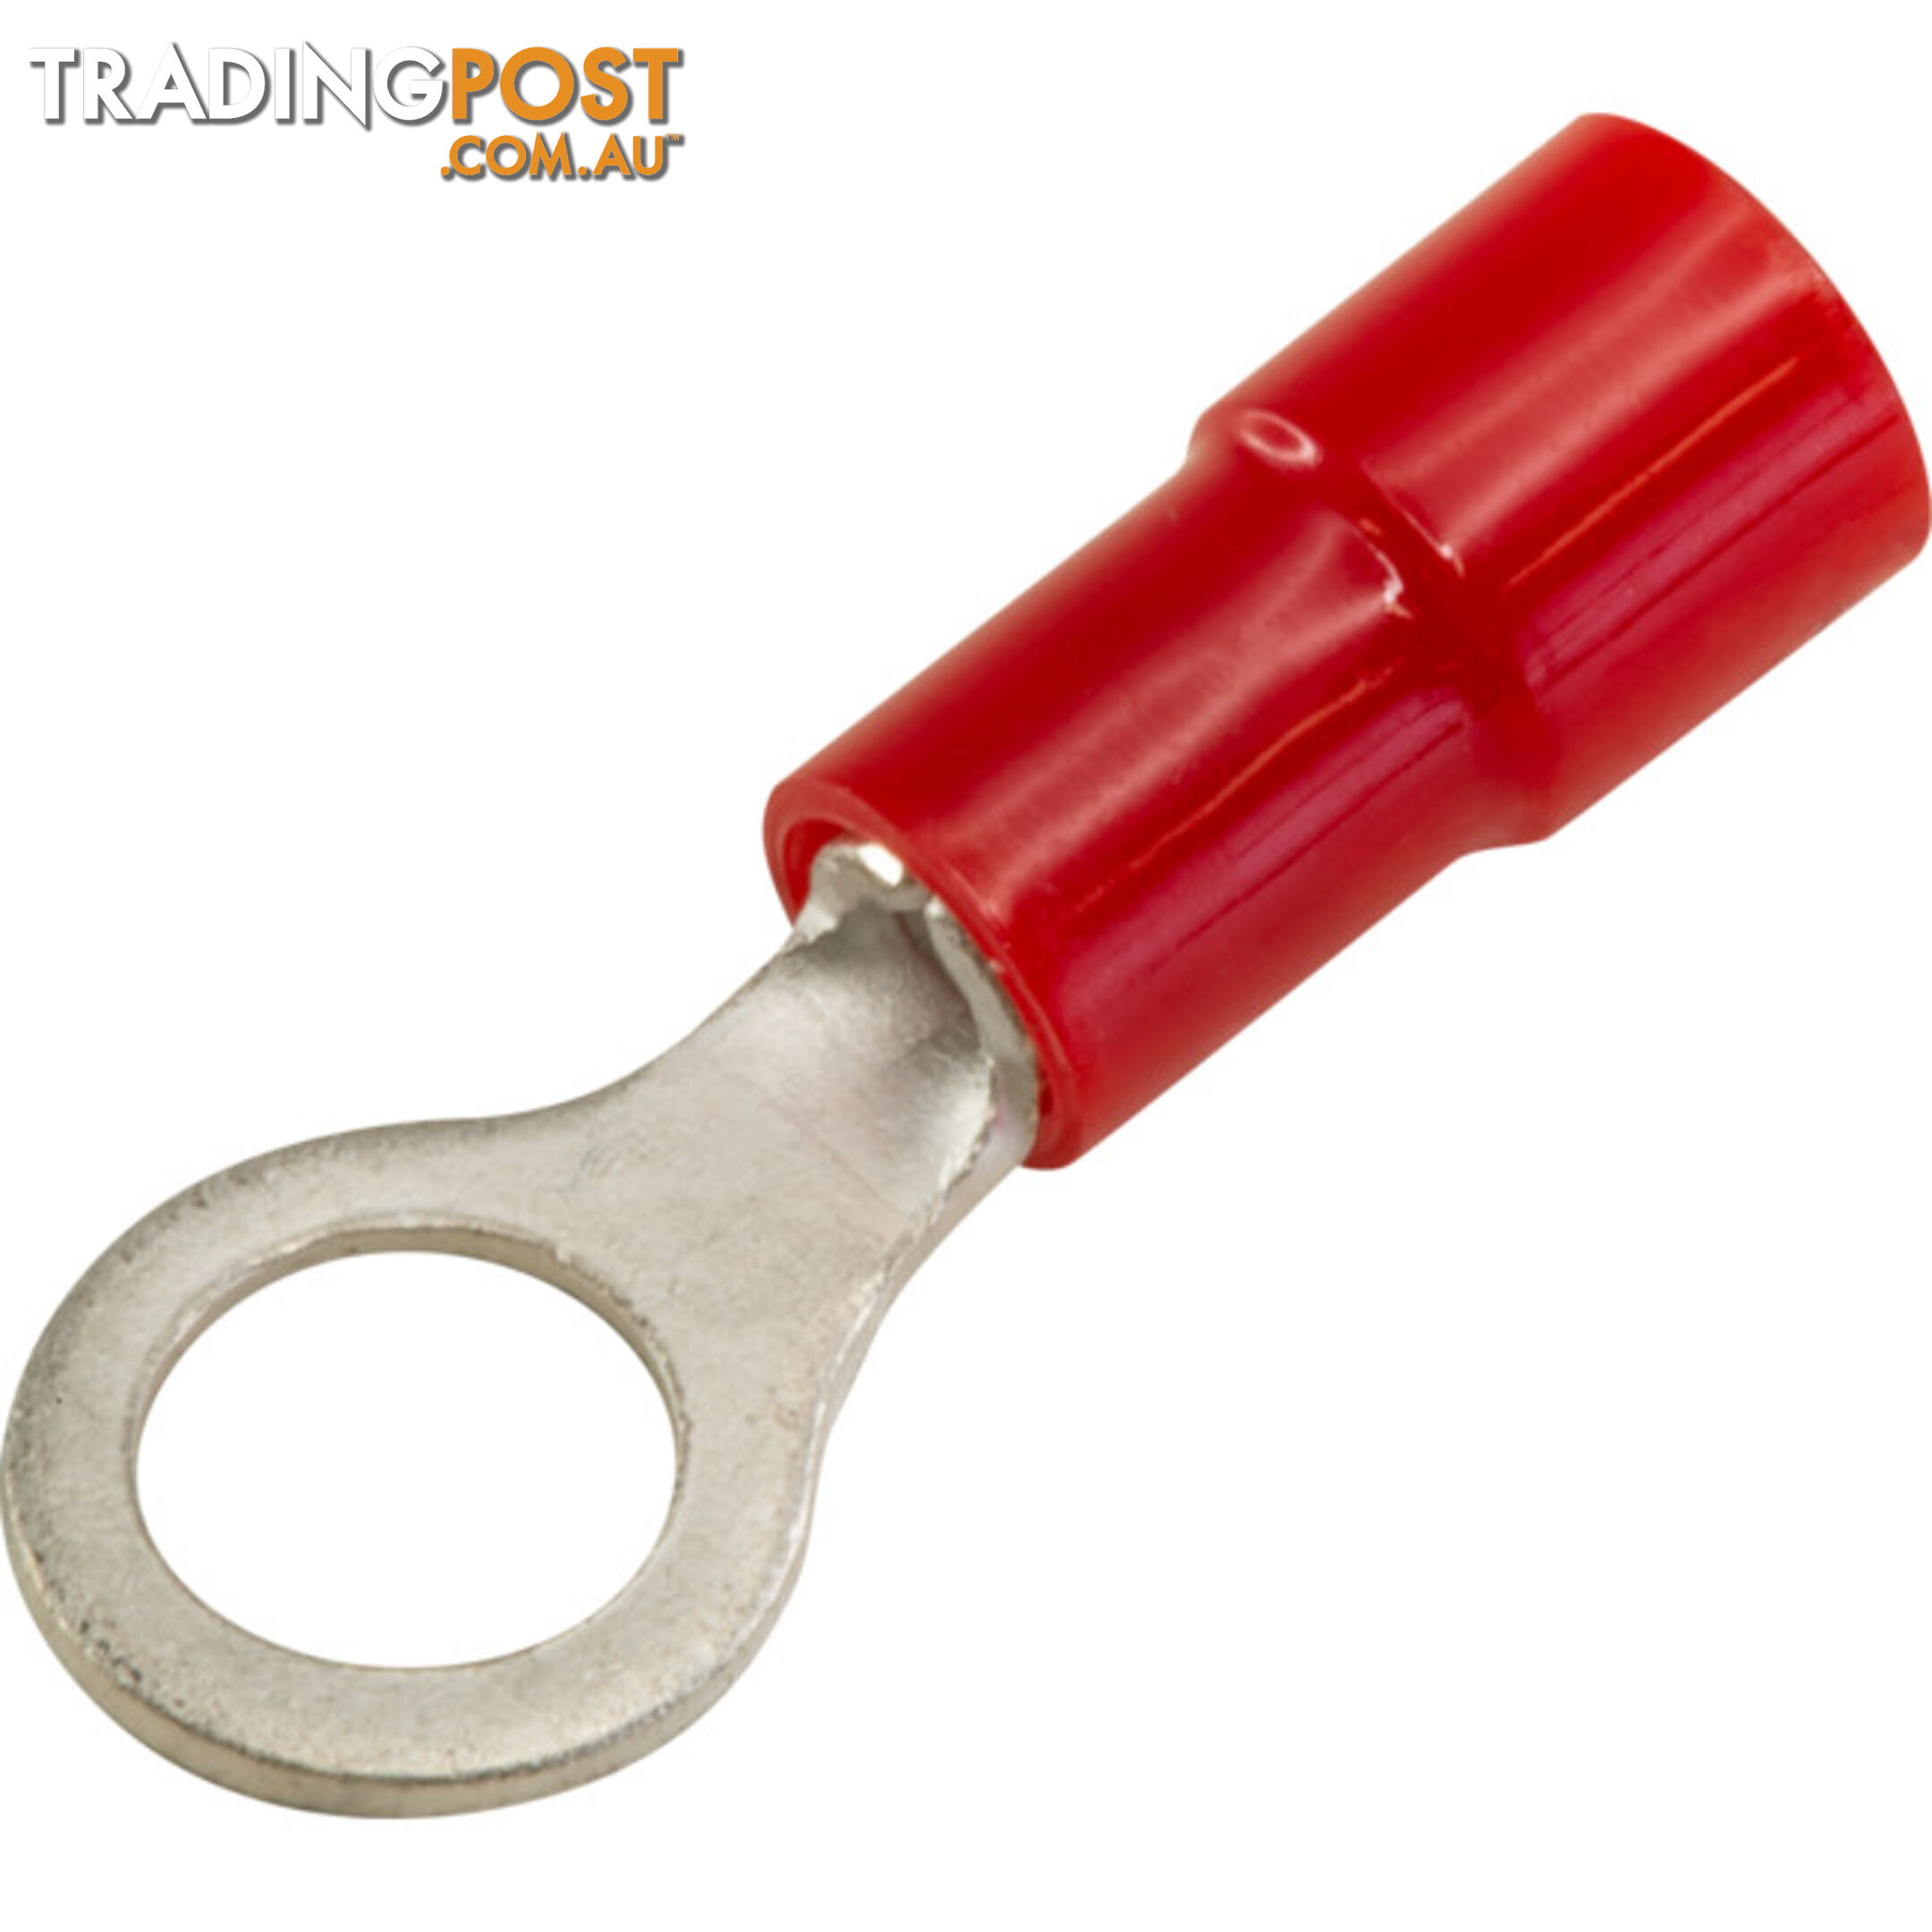 RT1.25-5-100 RING TERMINALS RED 5MM STUD 100PK WIRE RANGE .5-1MM SQUARE